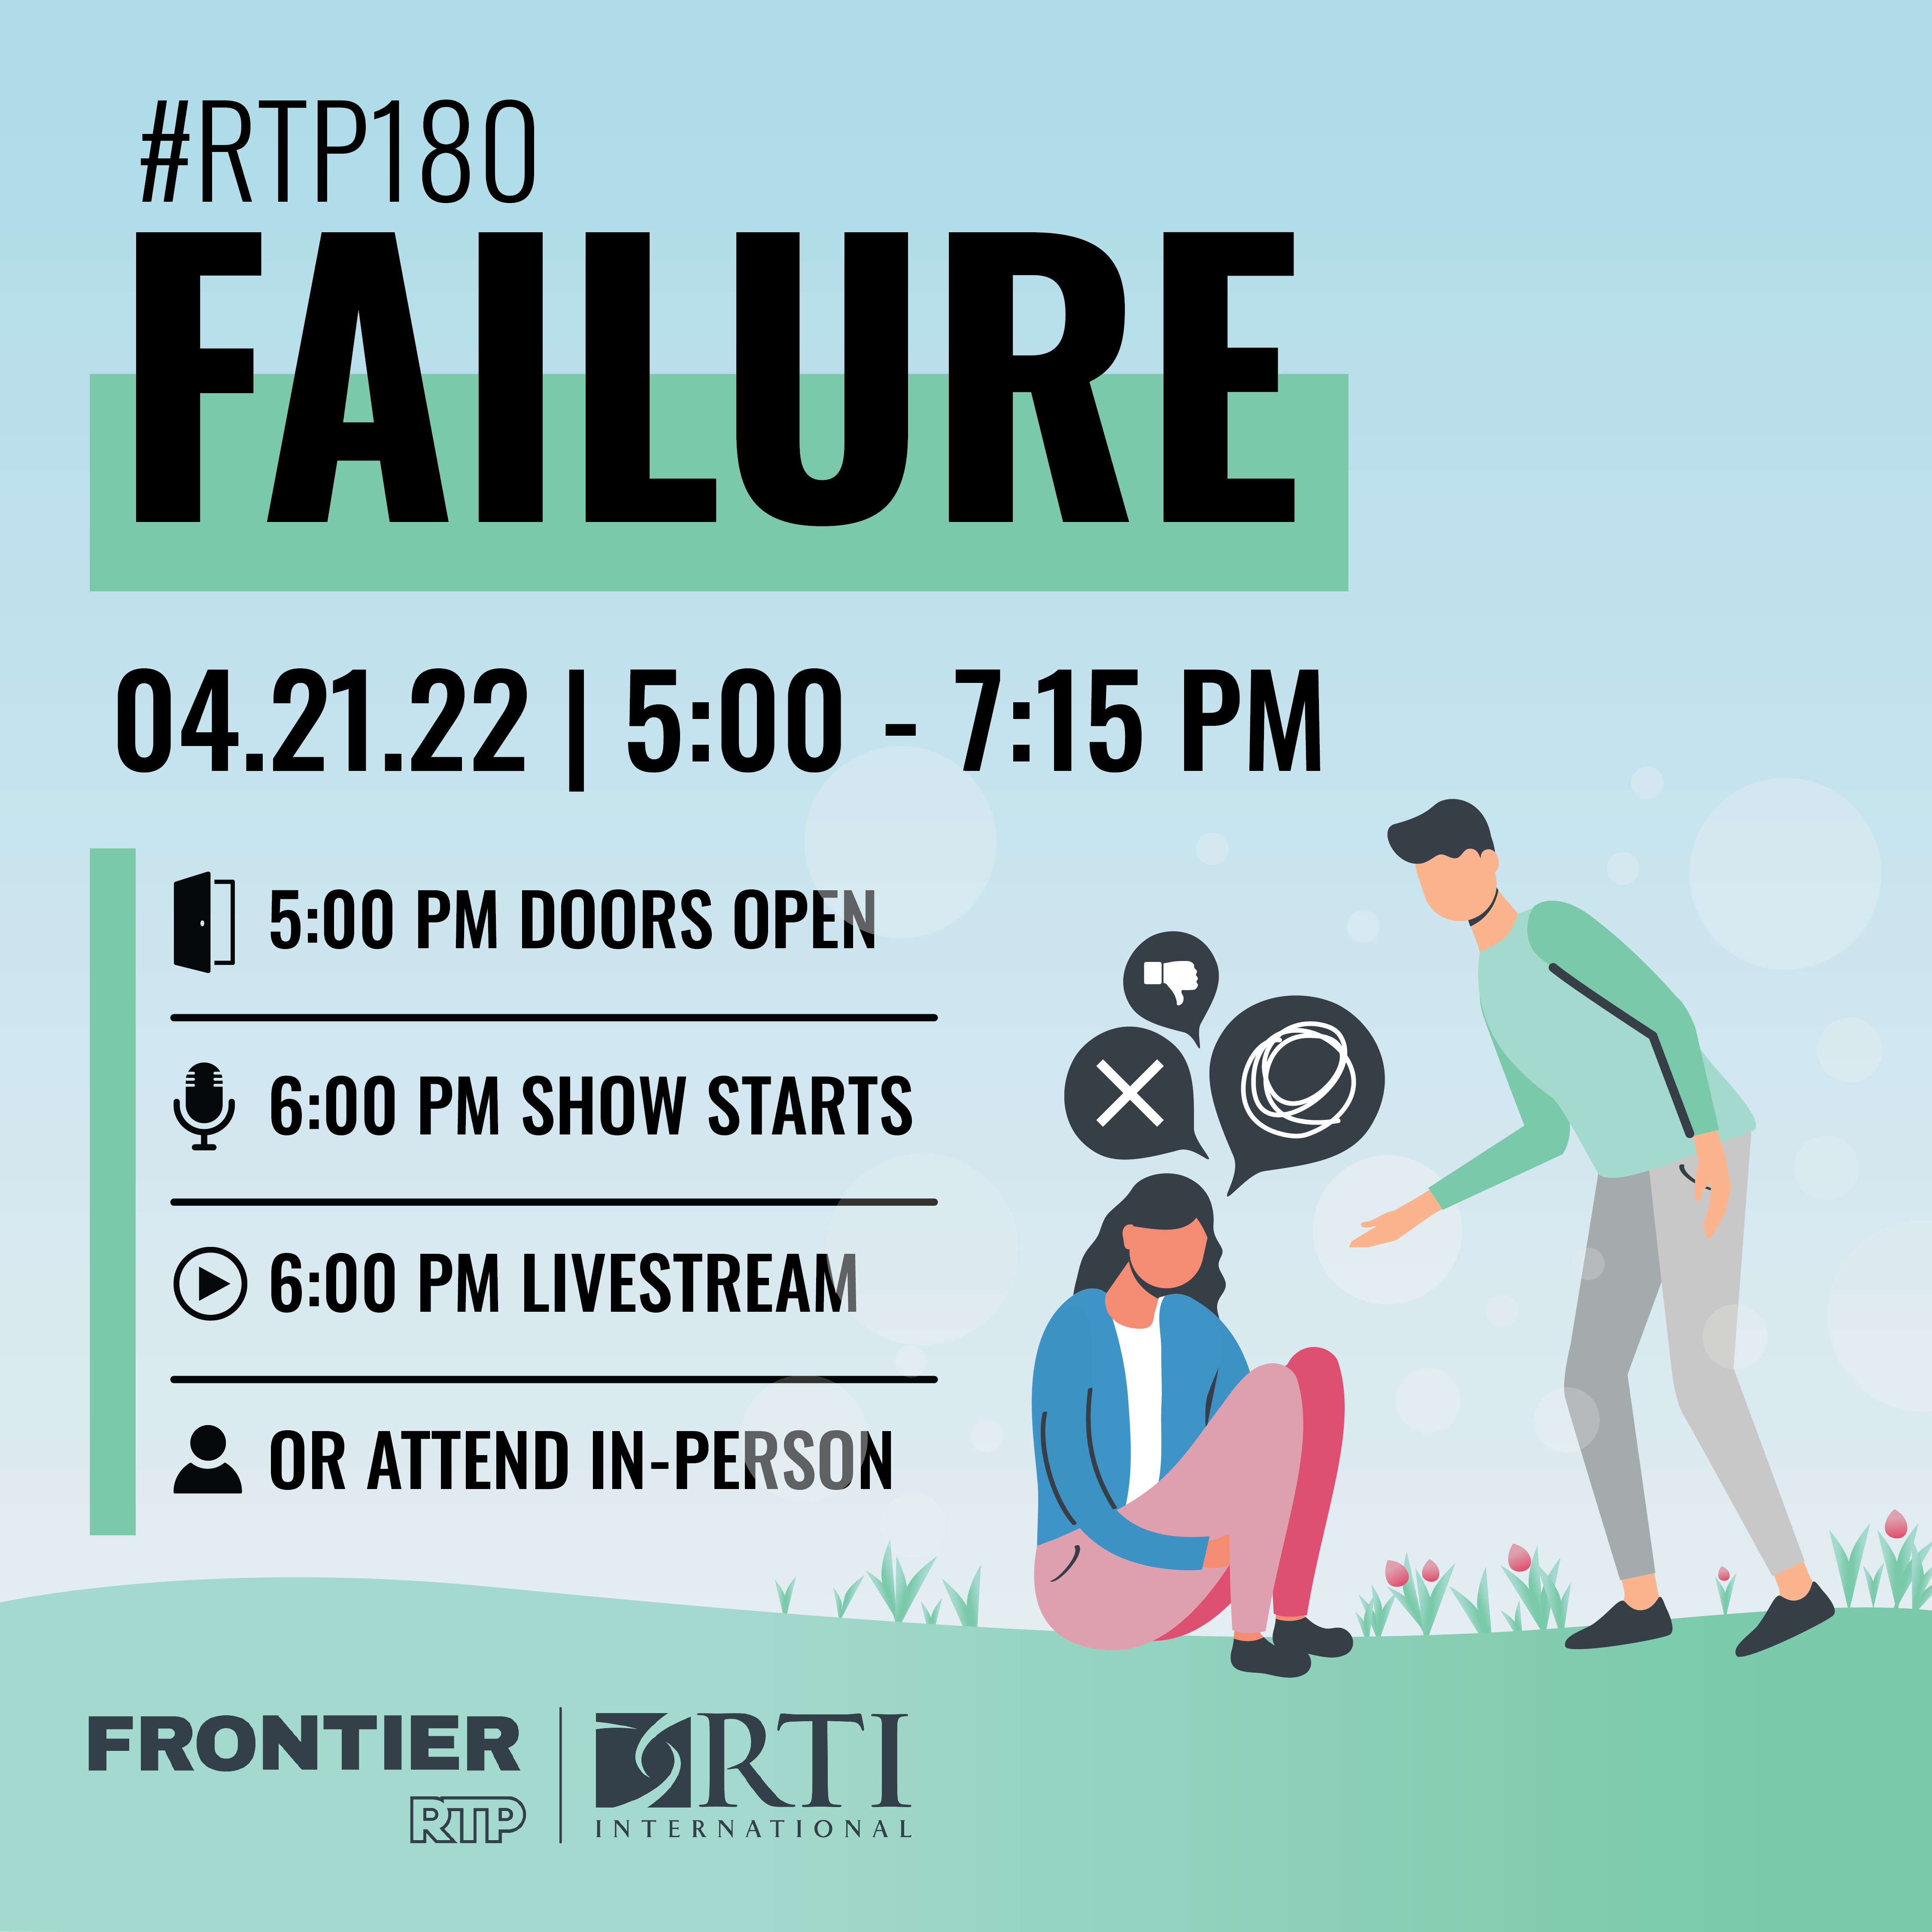 RTP180: Failure event April 21st at 5:00pm-7:15pm; doors open at 5:00pm but the show begins at 6:00pm.